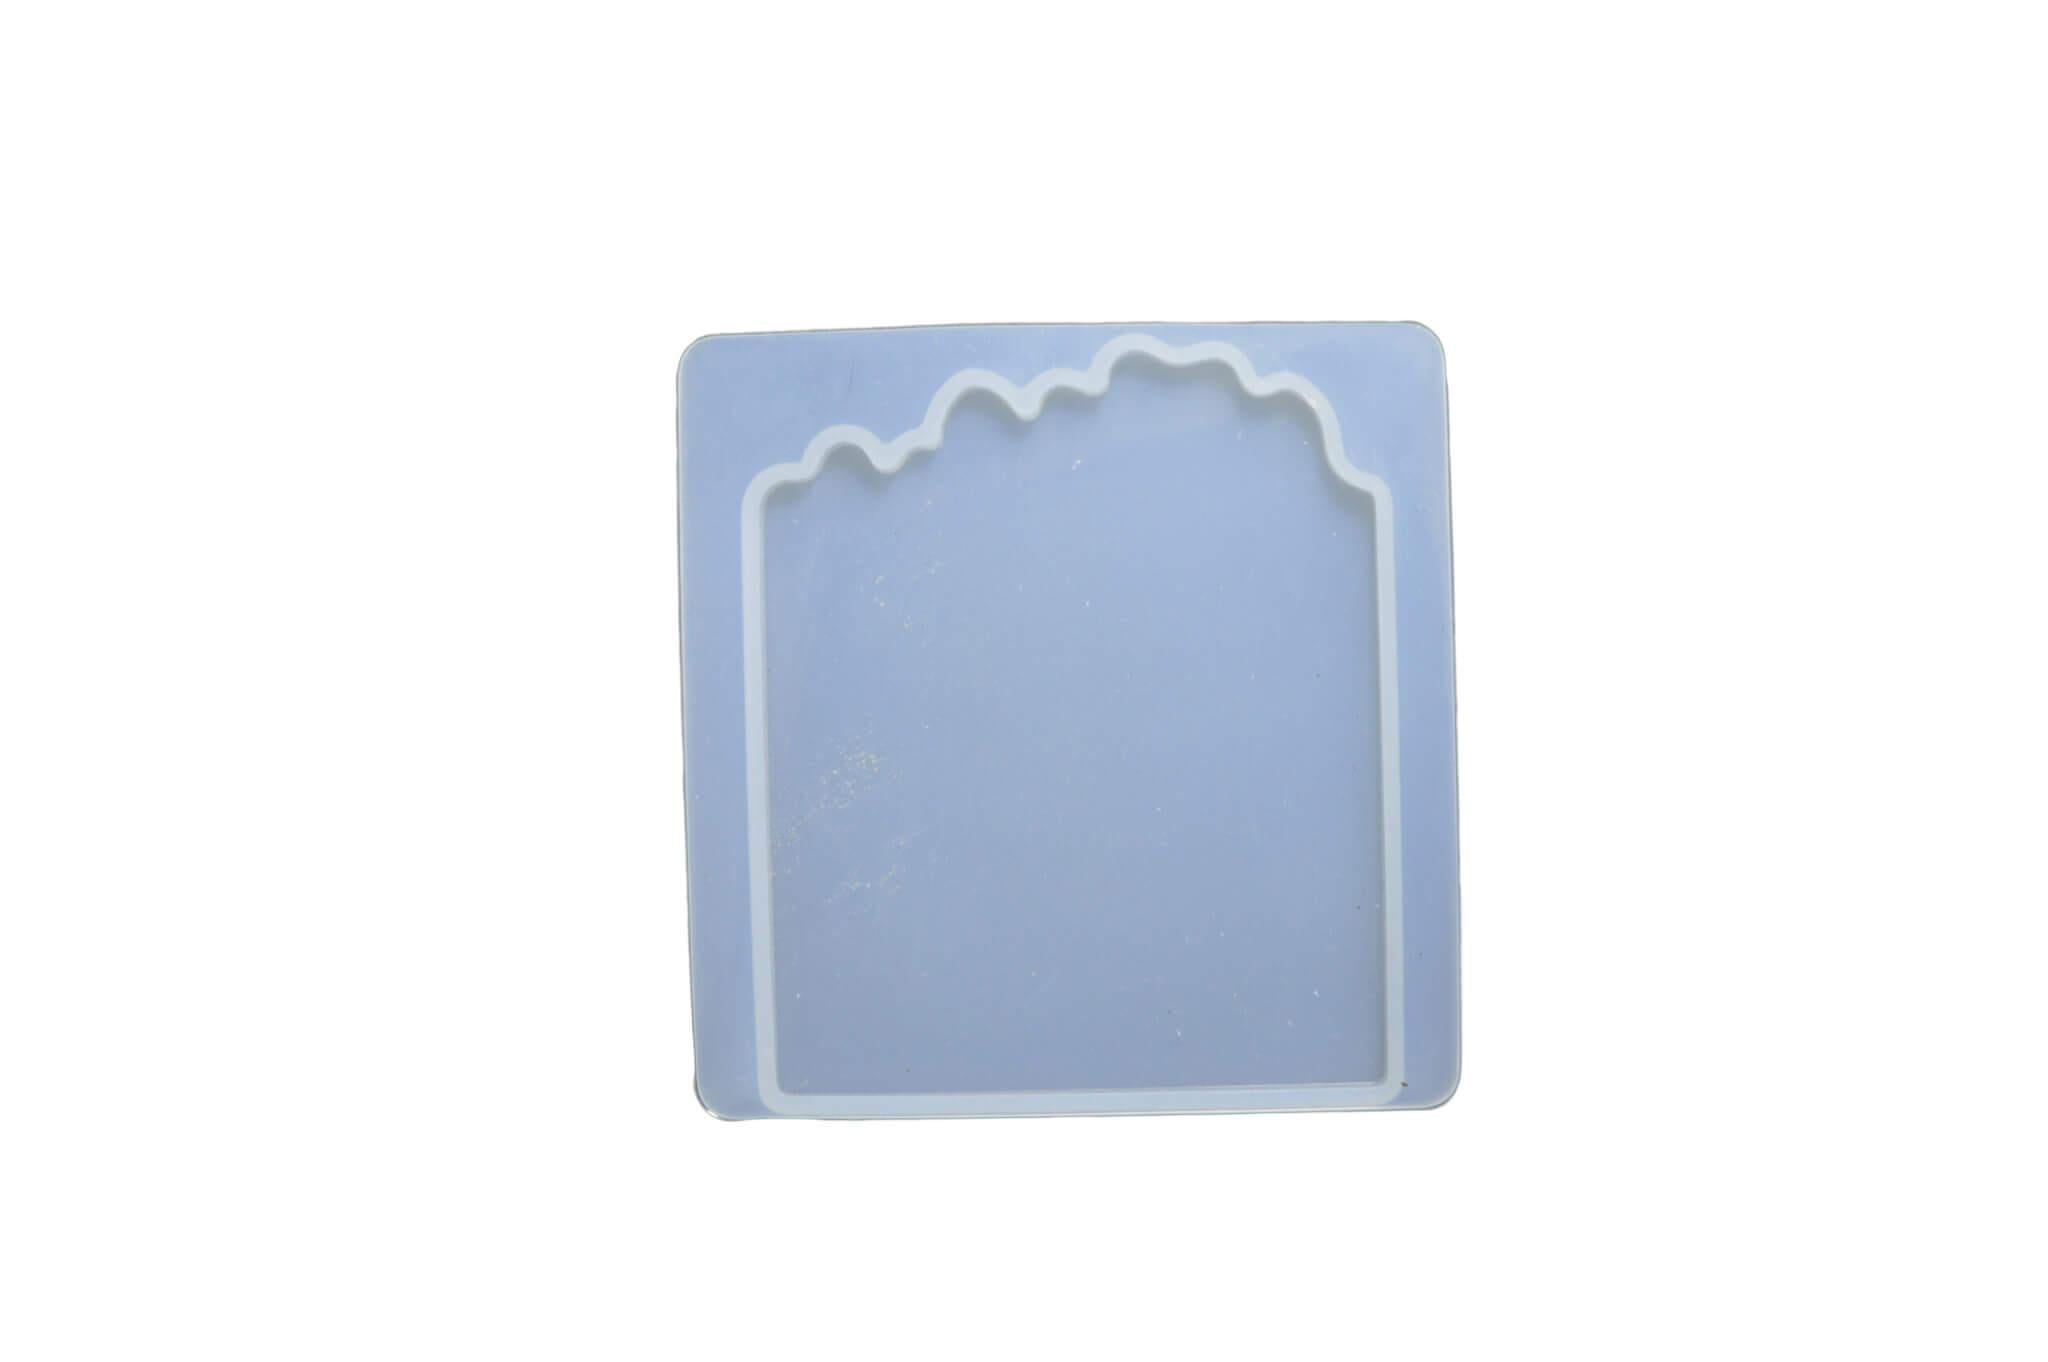 Silicone Mould for resin art coaster - agate rectangular shape - 1 Pc